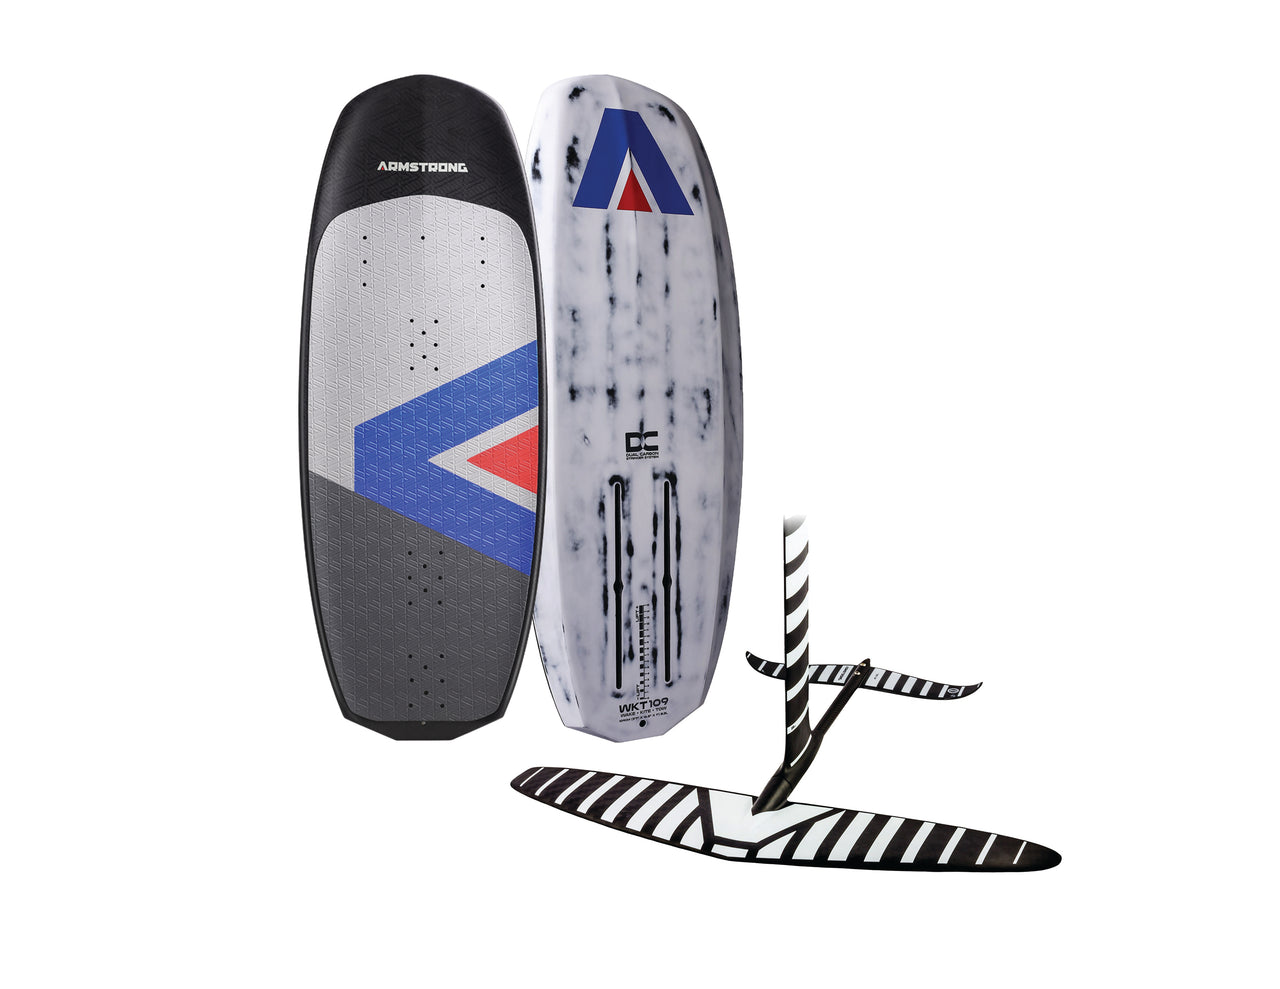 Armstrong Wakefoil Board W/ Armstrong HS1250 Foil Kit Package | 2023 | Pre-Order